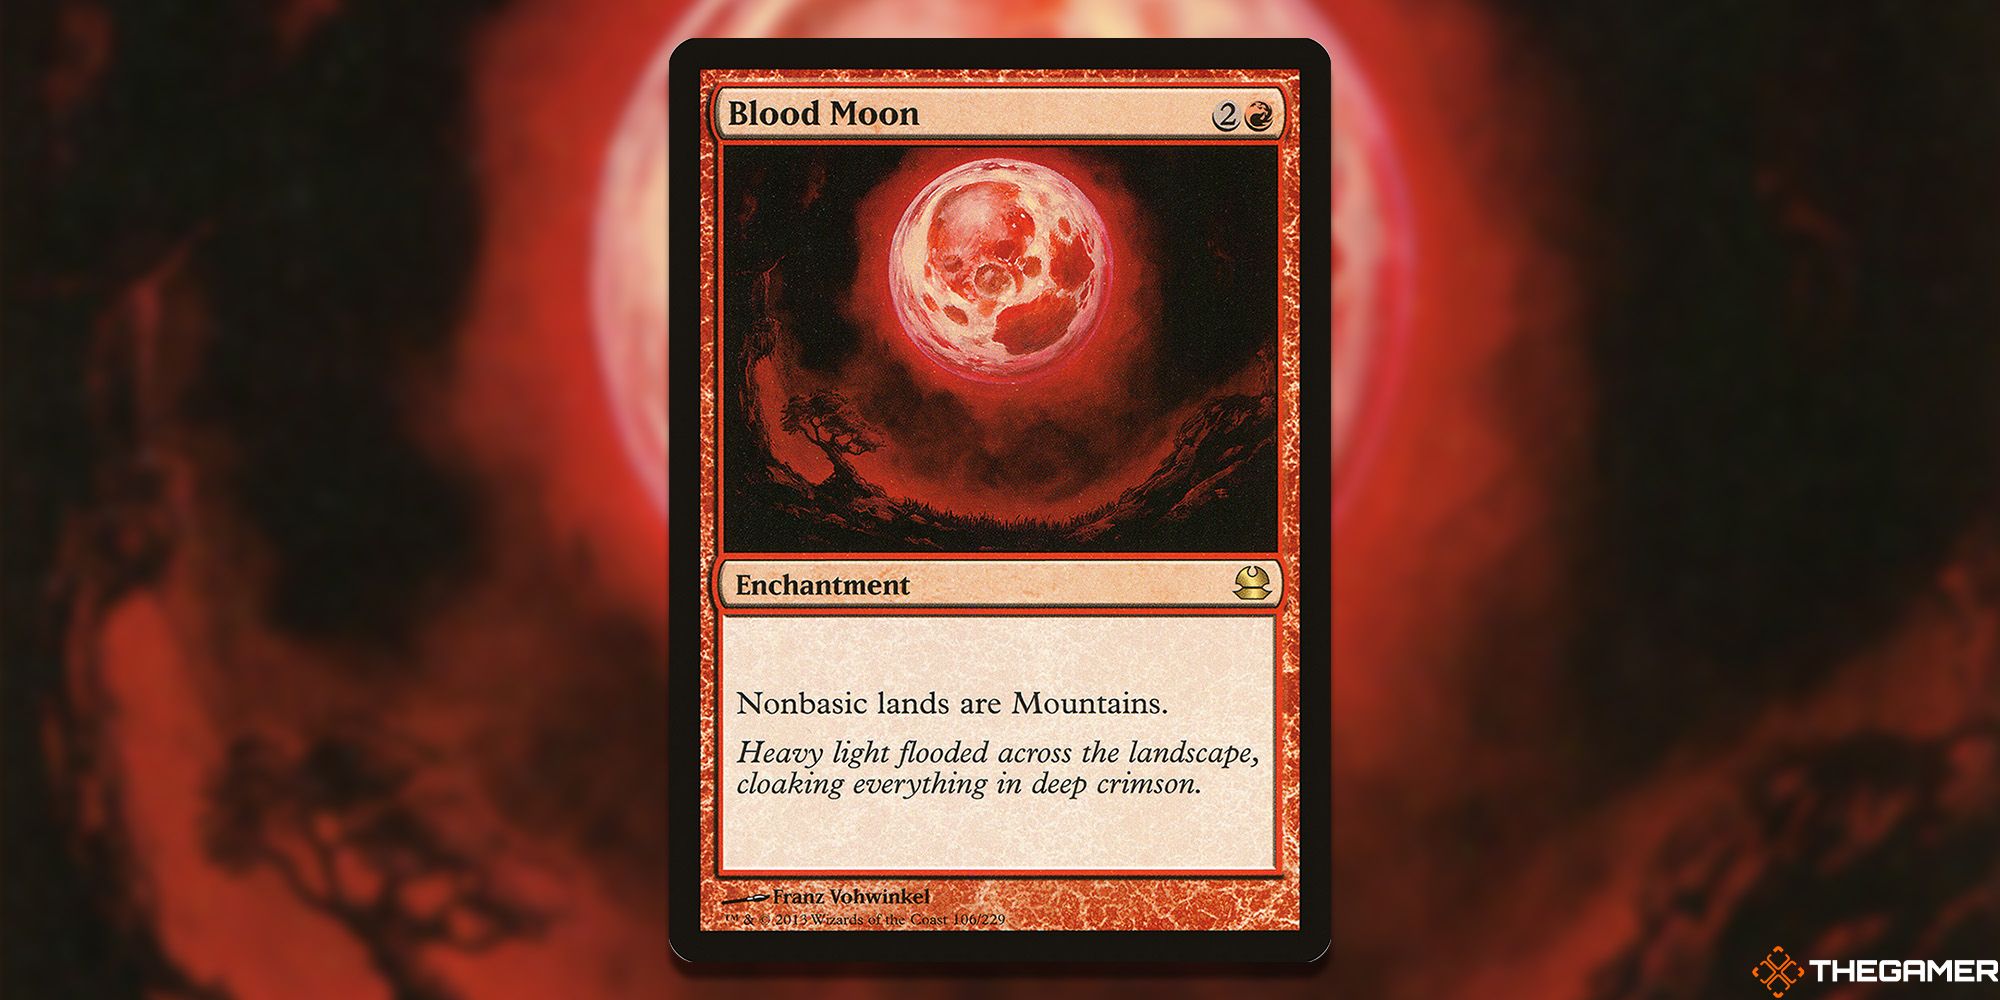 Blood Moon card and artwork from Magic: The Gathering.